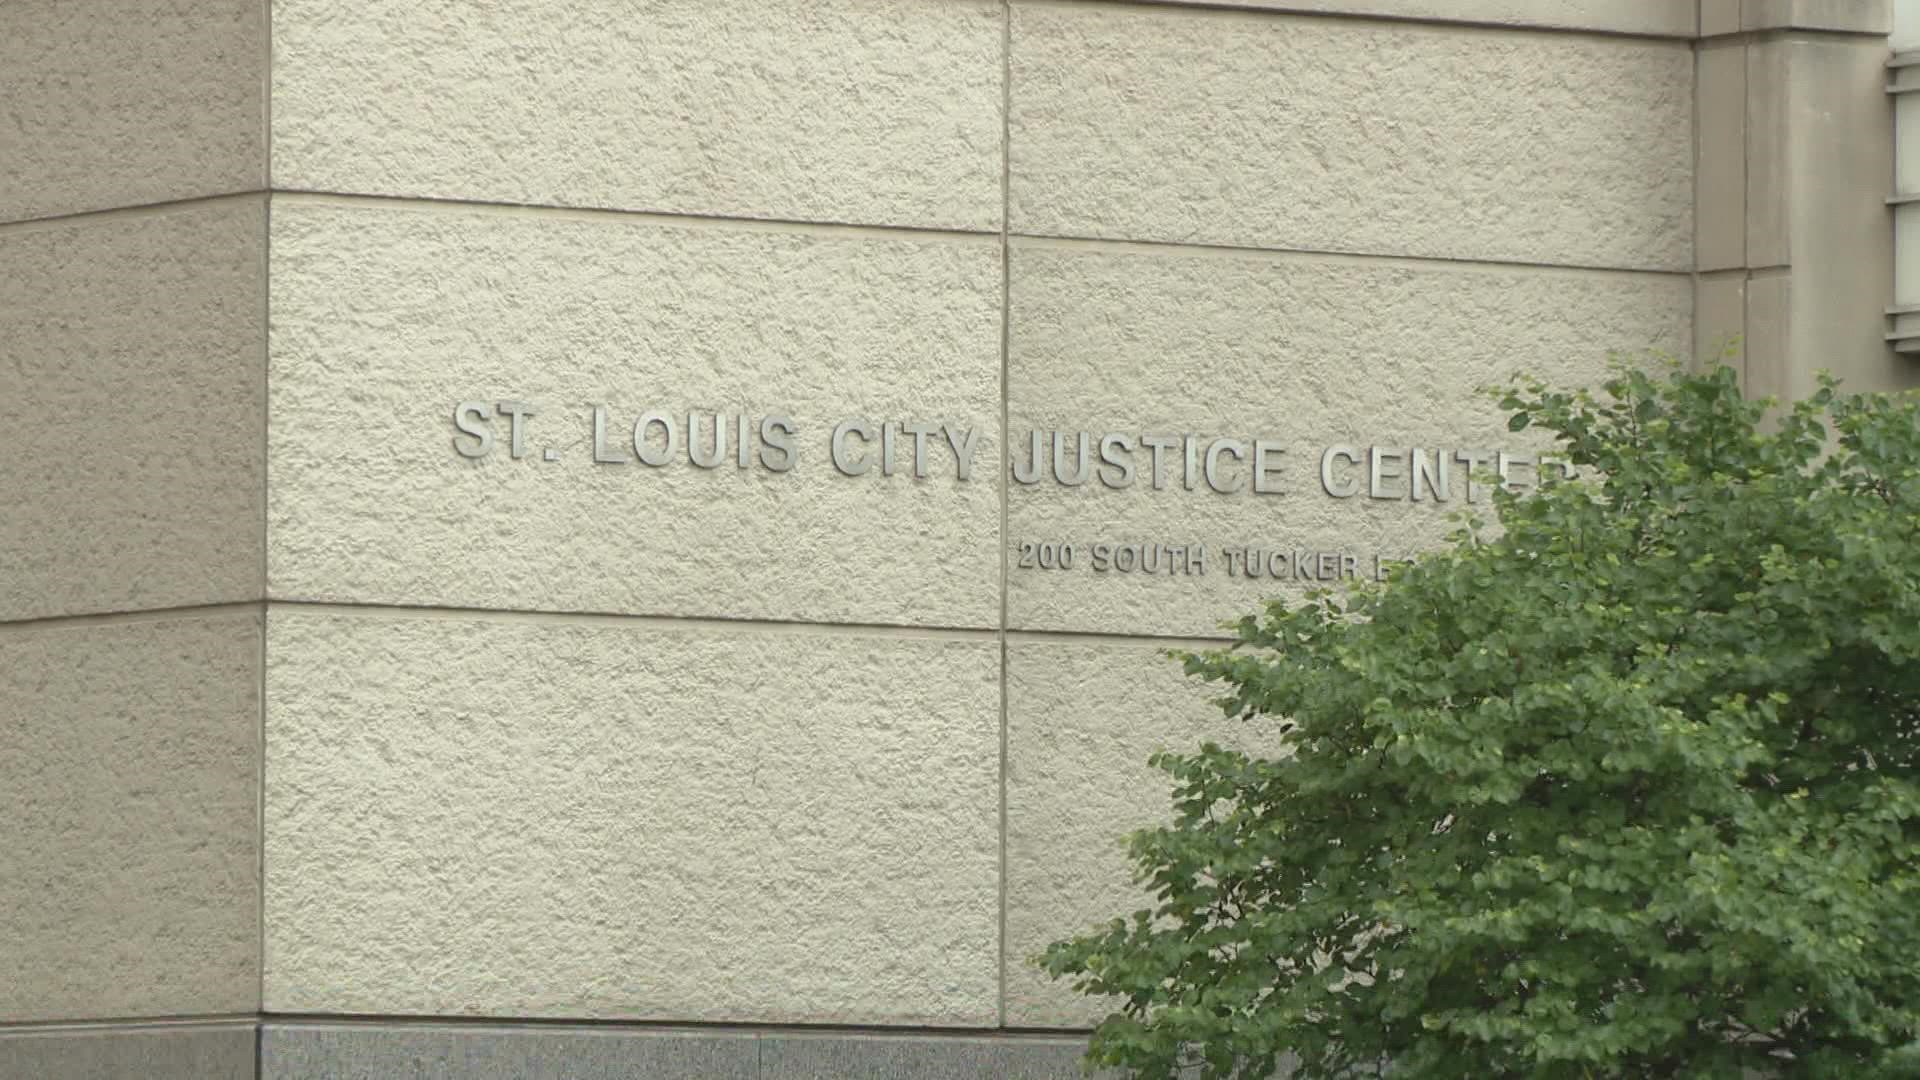 A detainee at St. Louis' City Justice Center died Wednesday afternoon after being found unresponsive, officials said.